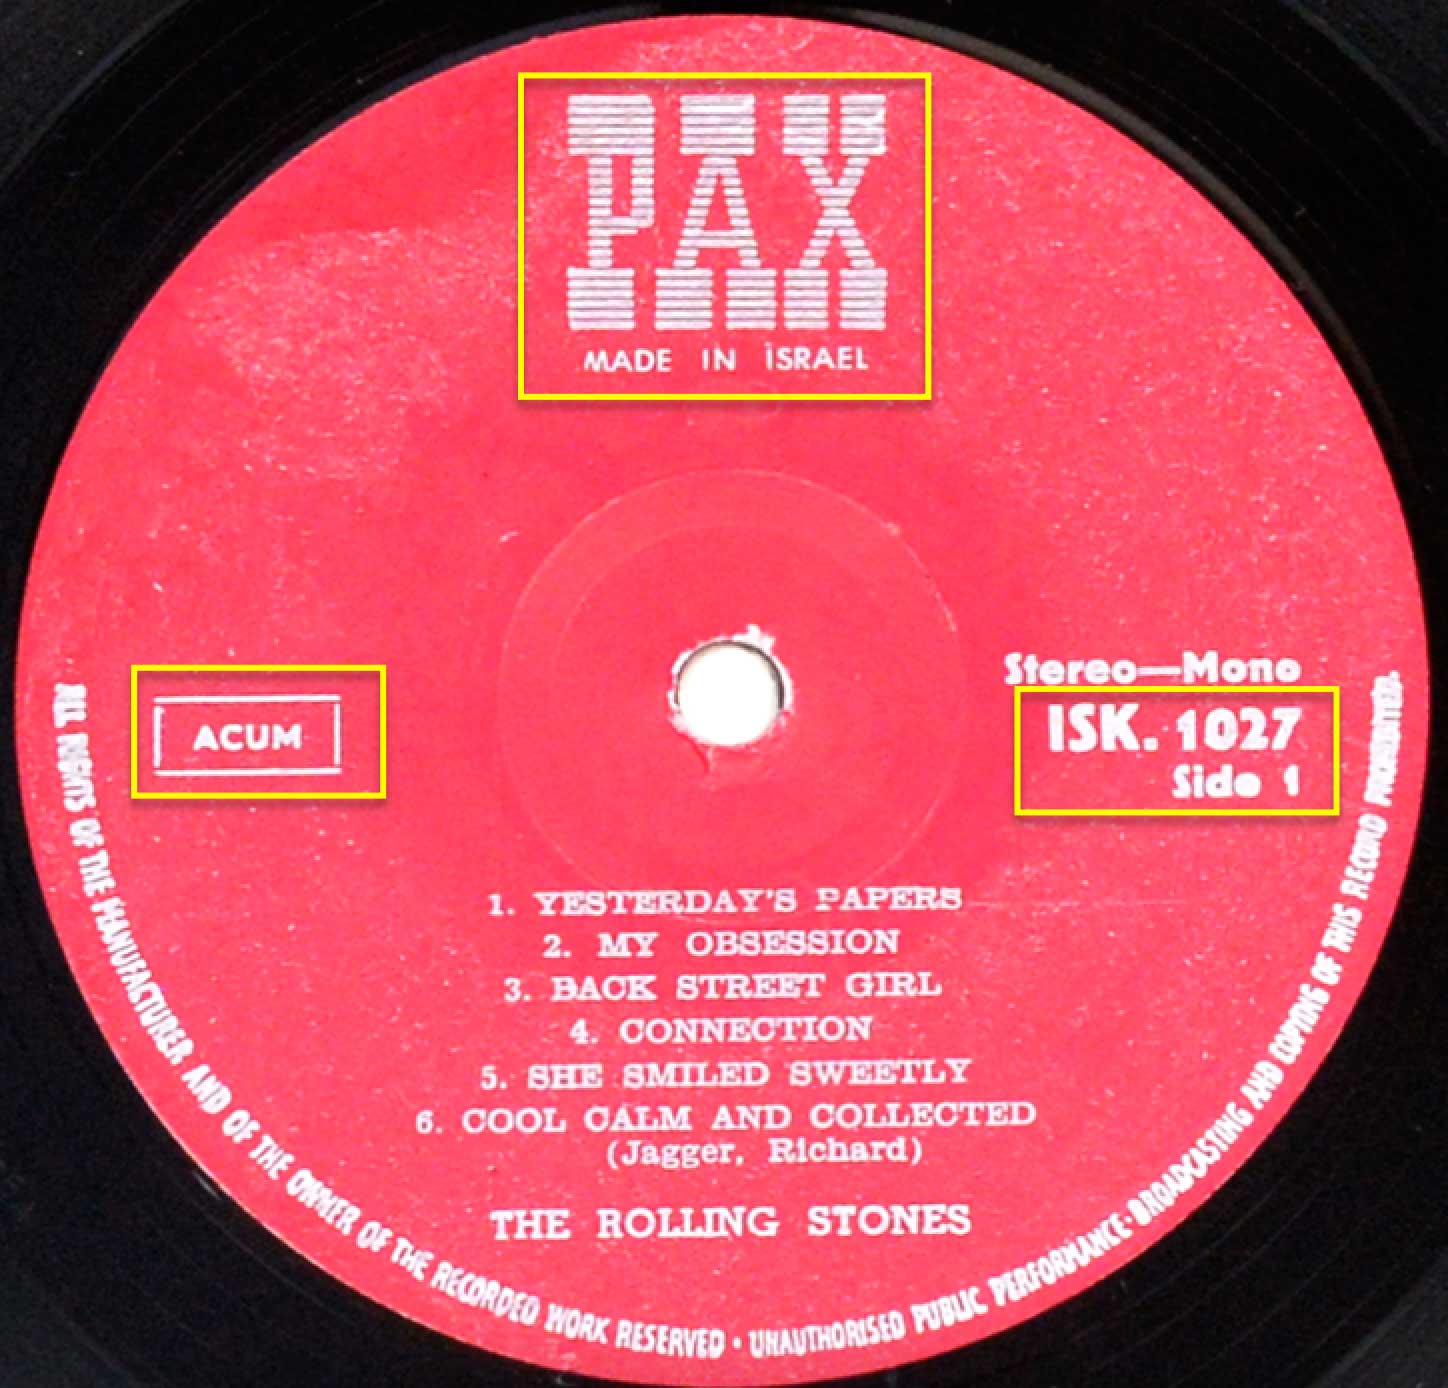 Enlarged & Zoomed photo of "ROLLING STONES Between Buttons" Record's Label